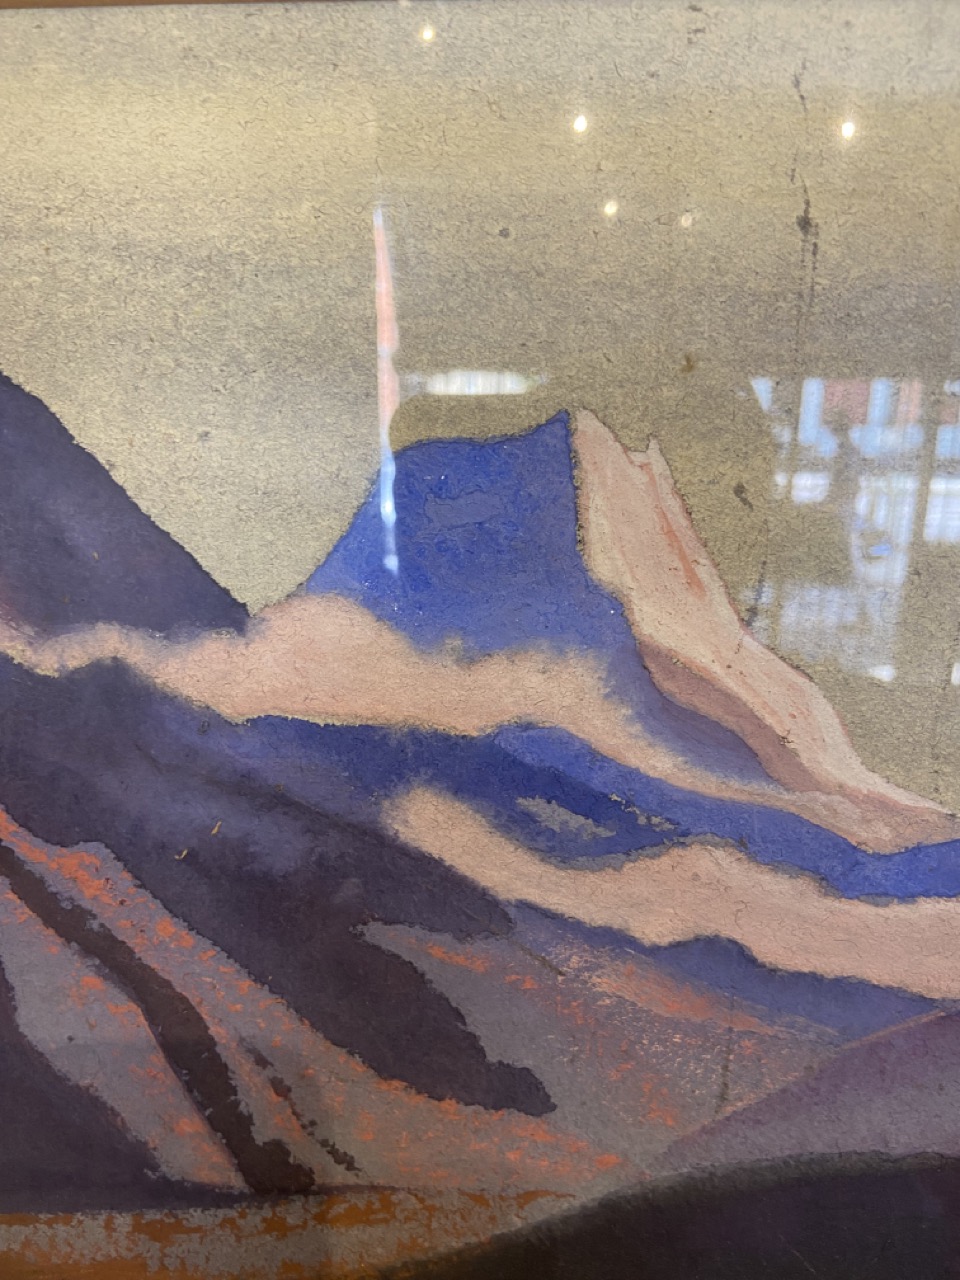 Nikolai Konstantinovich Roerich (1874 - 1947), A painting from the Himalaya Series (c. 1925 - 1927) - Image 7 of 8